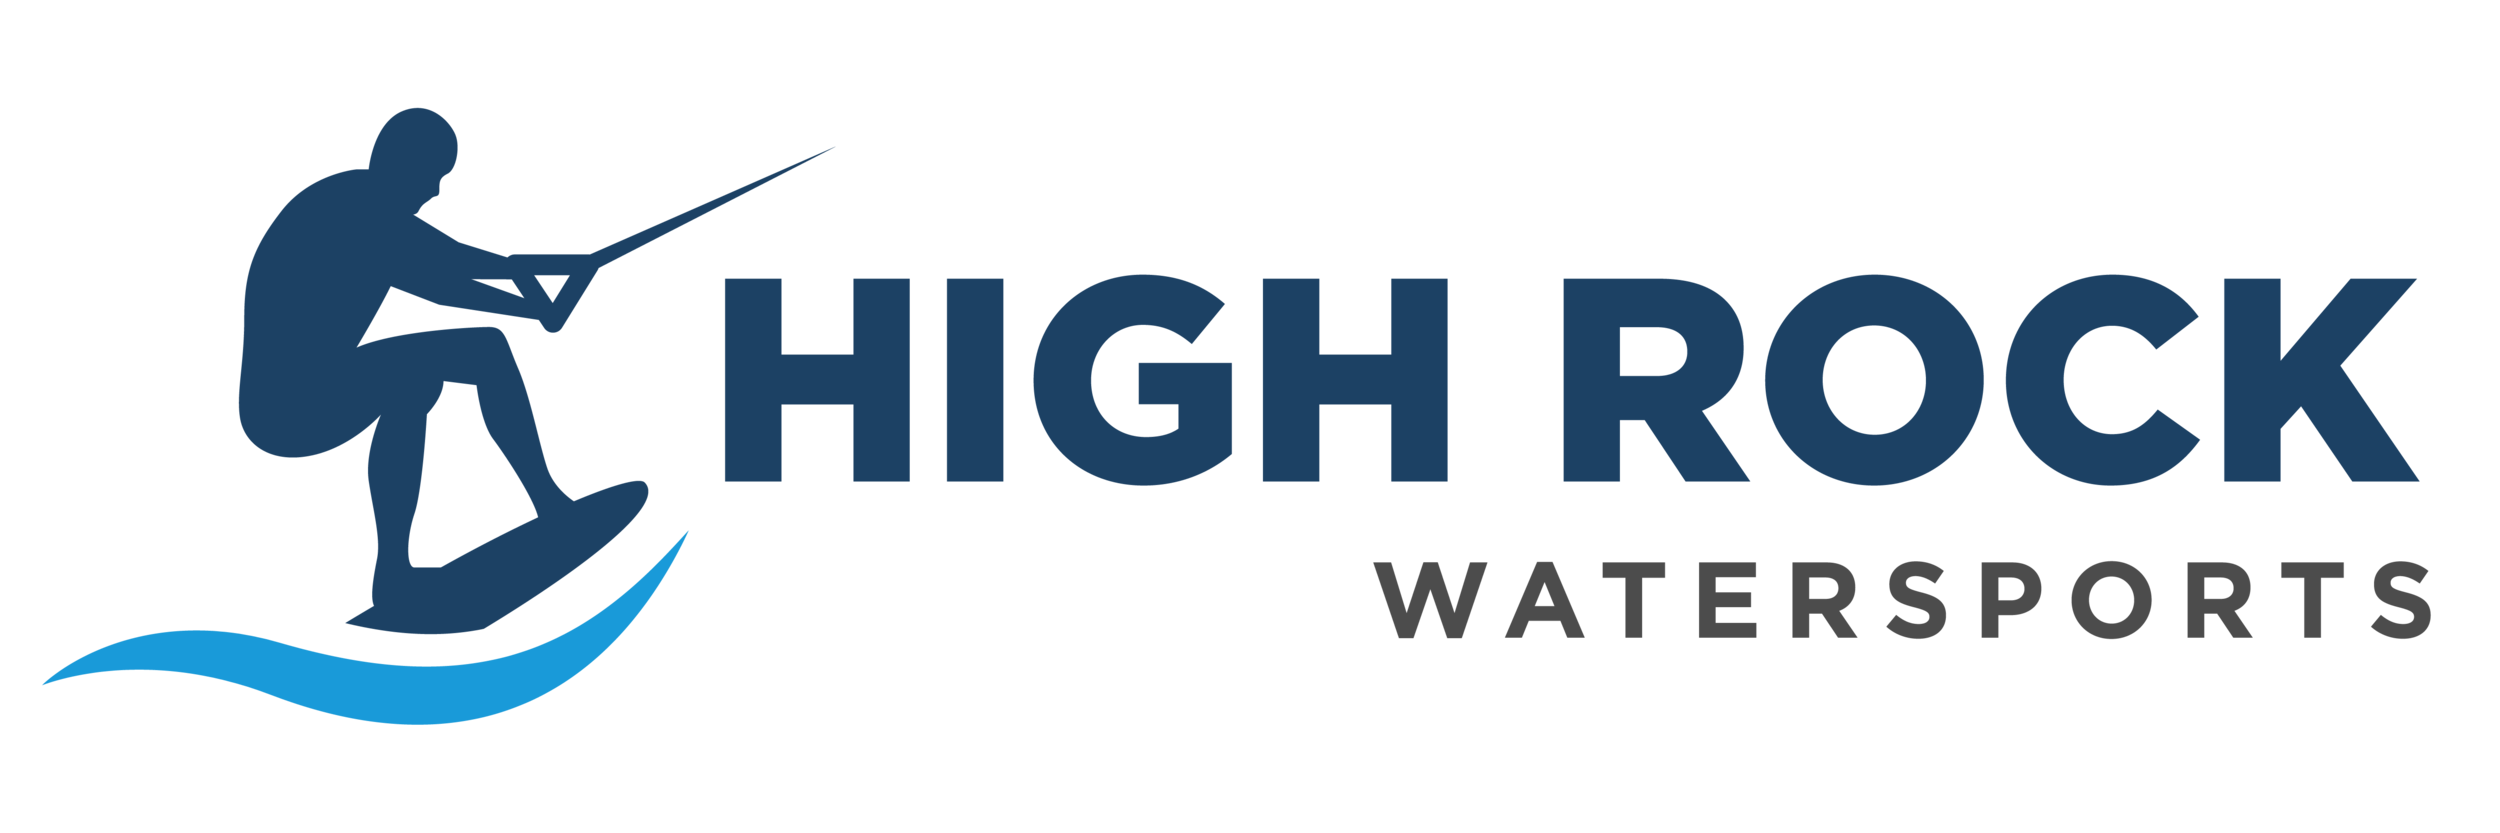 High Rock Watersports